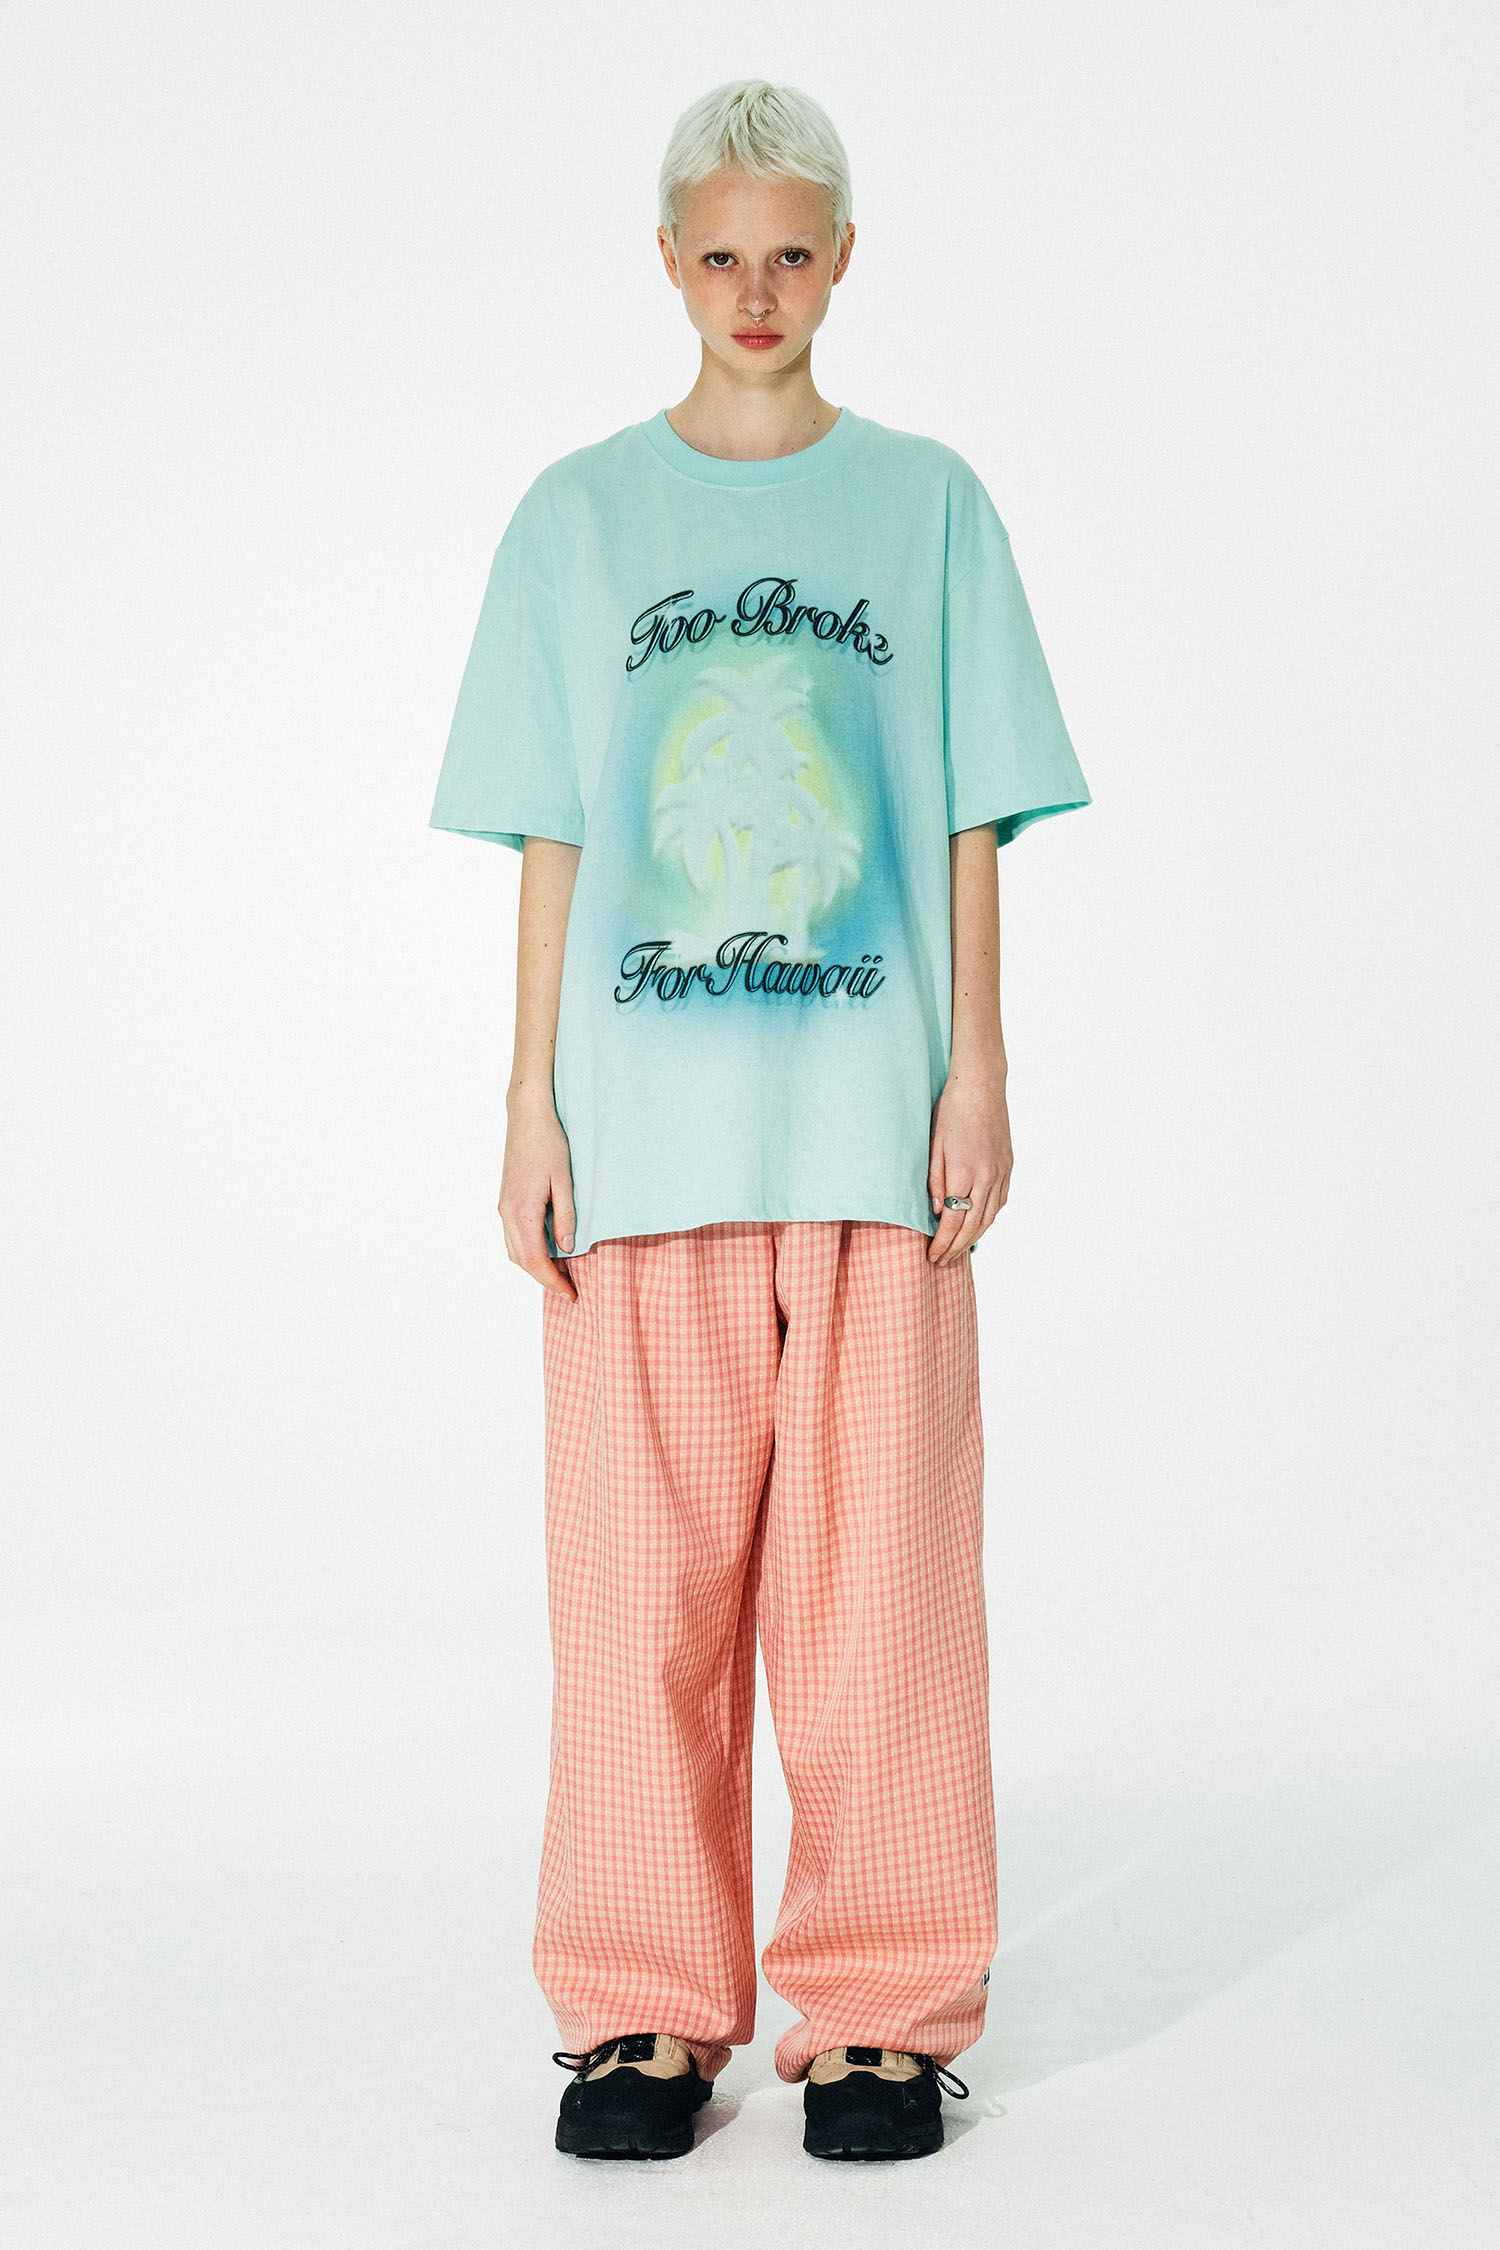 Summer is expensive Tee Mint